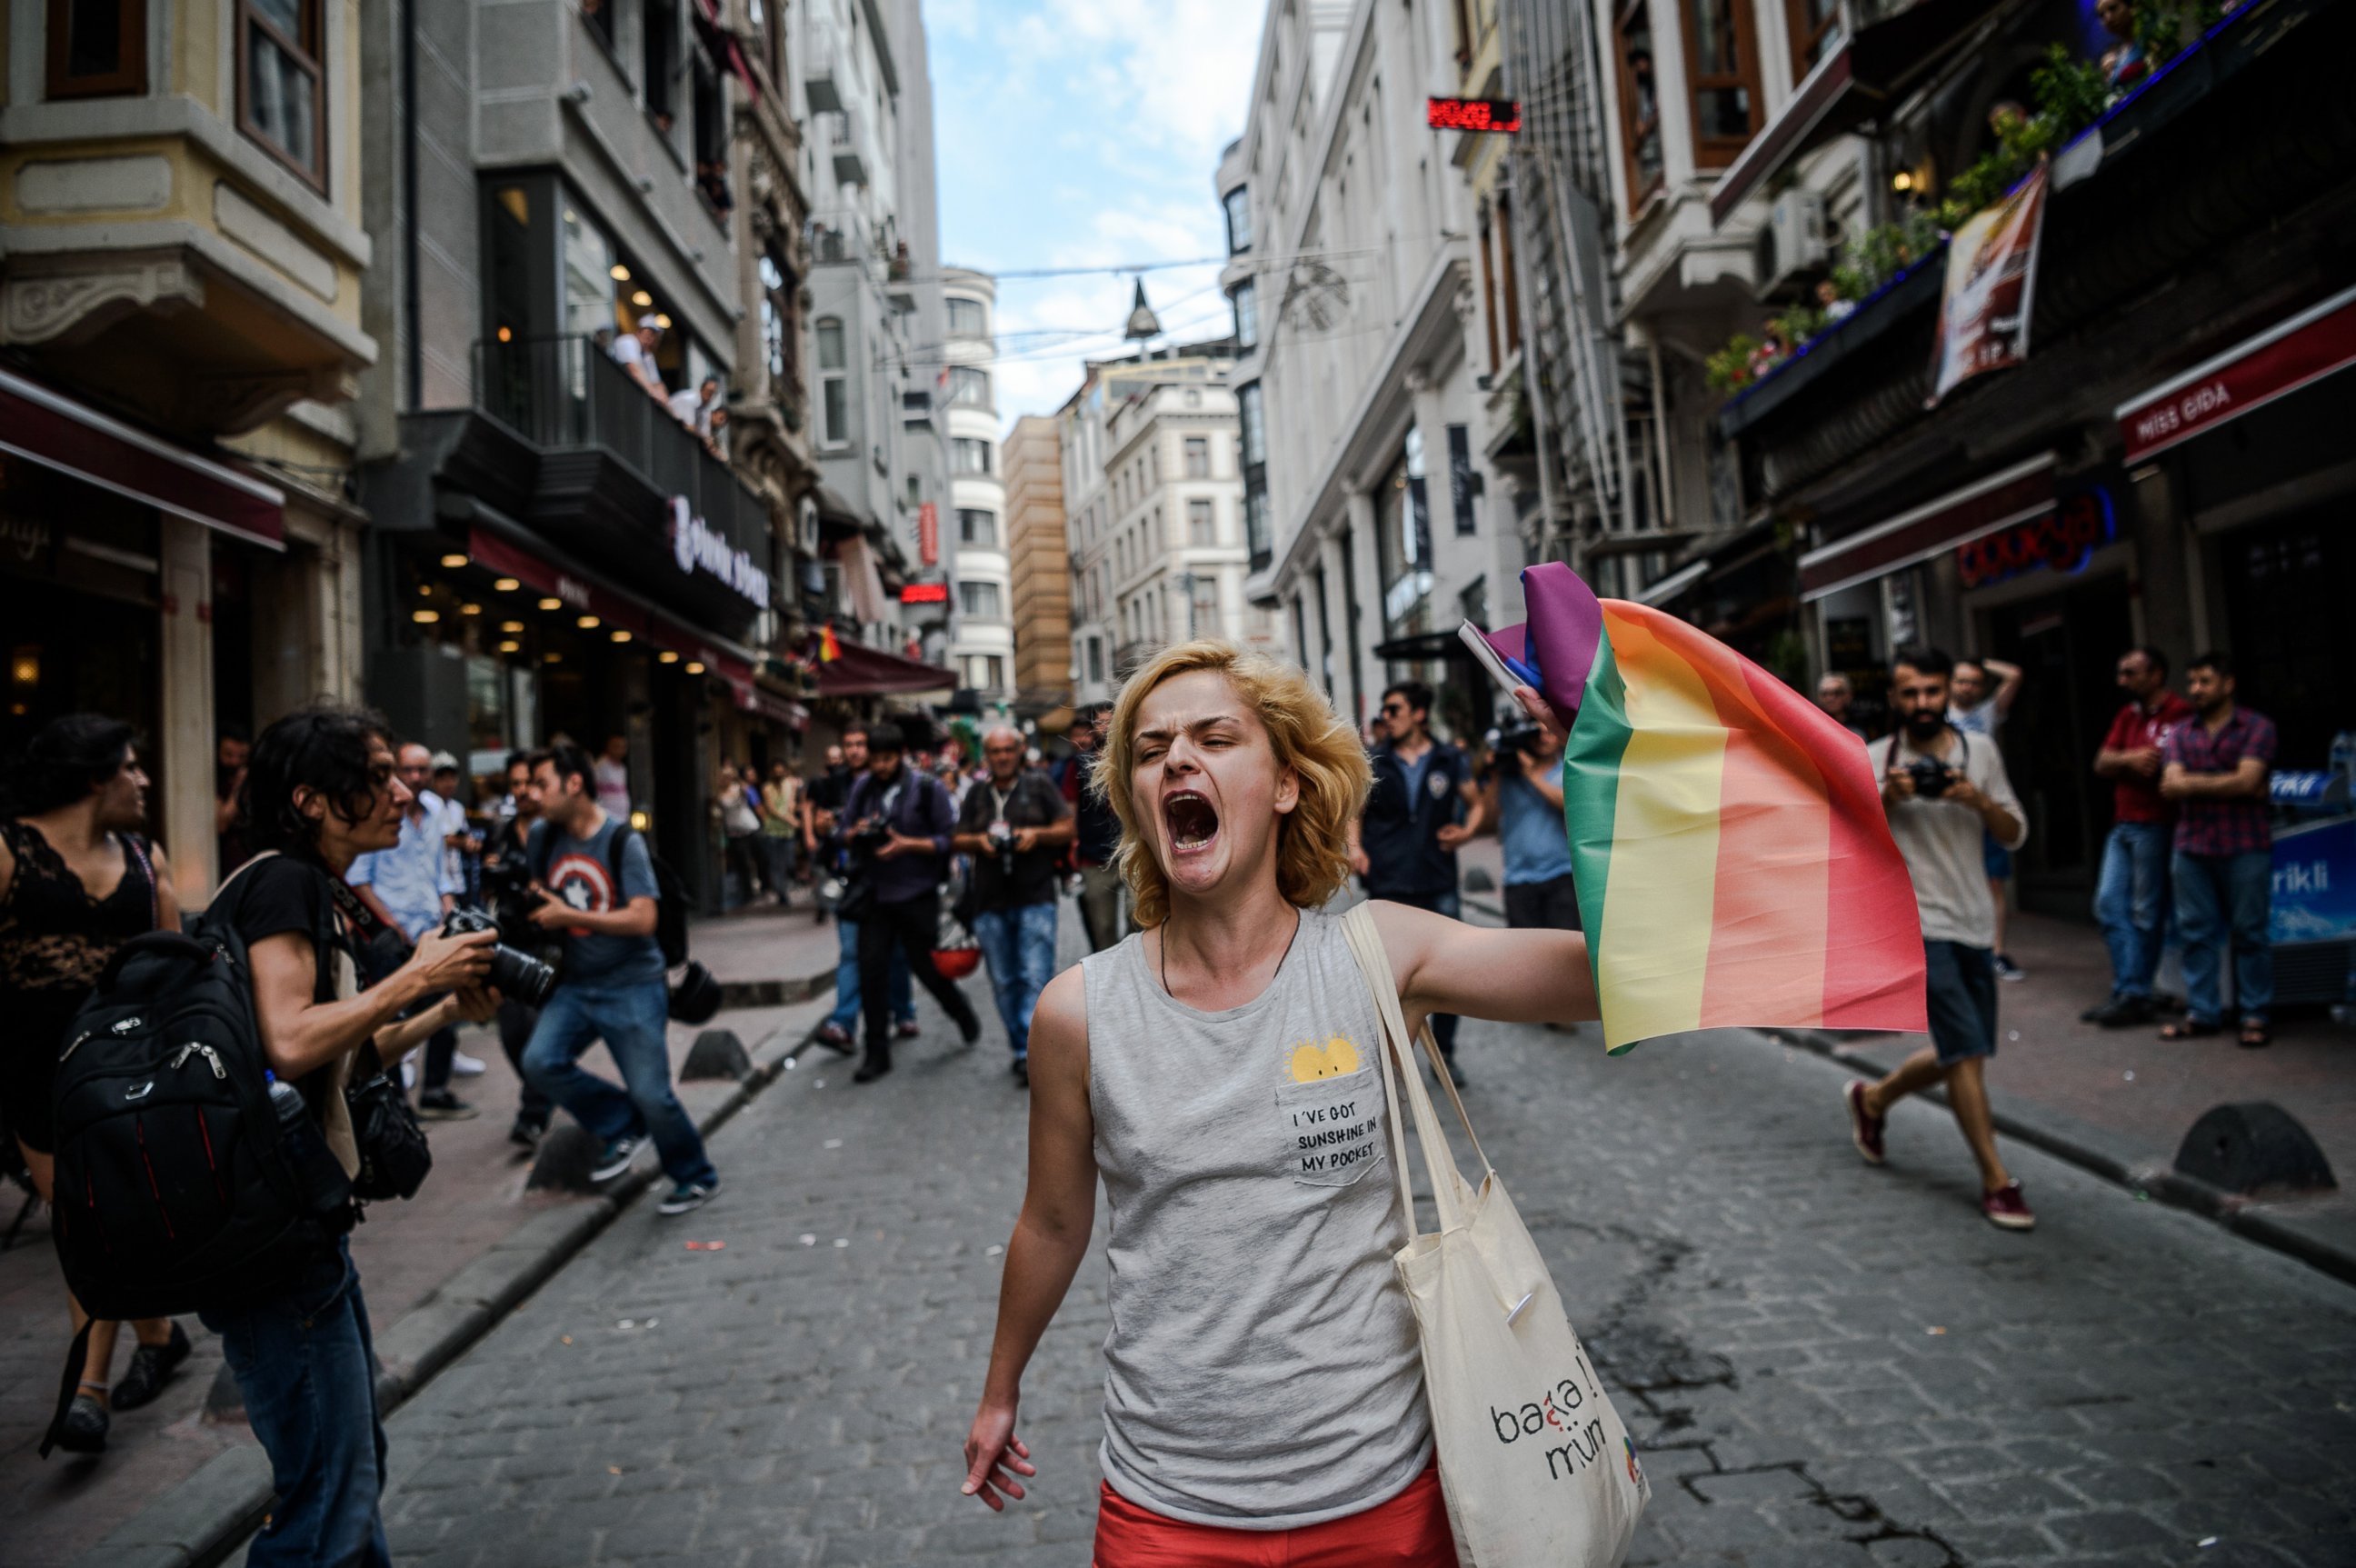 PHOTO: A LGBT member waves a rainbow flag during a rally staged by the LGBT community on Istiklal avenue in Istanbul, June 26, 2016.
